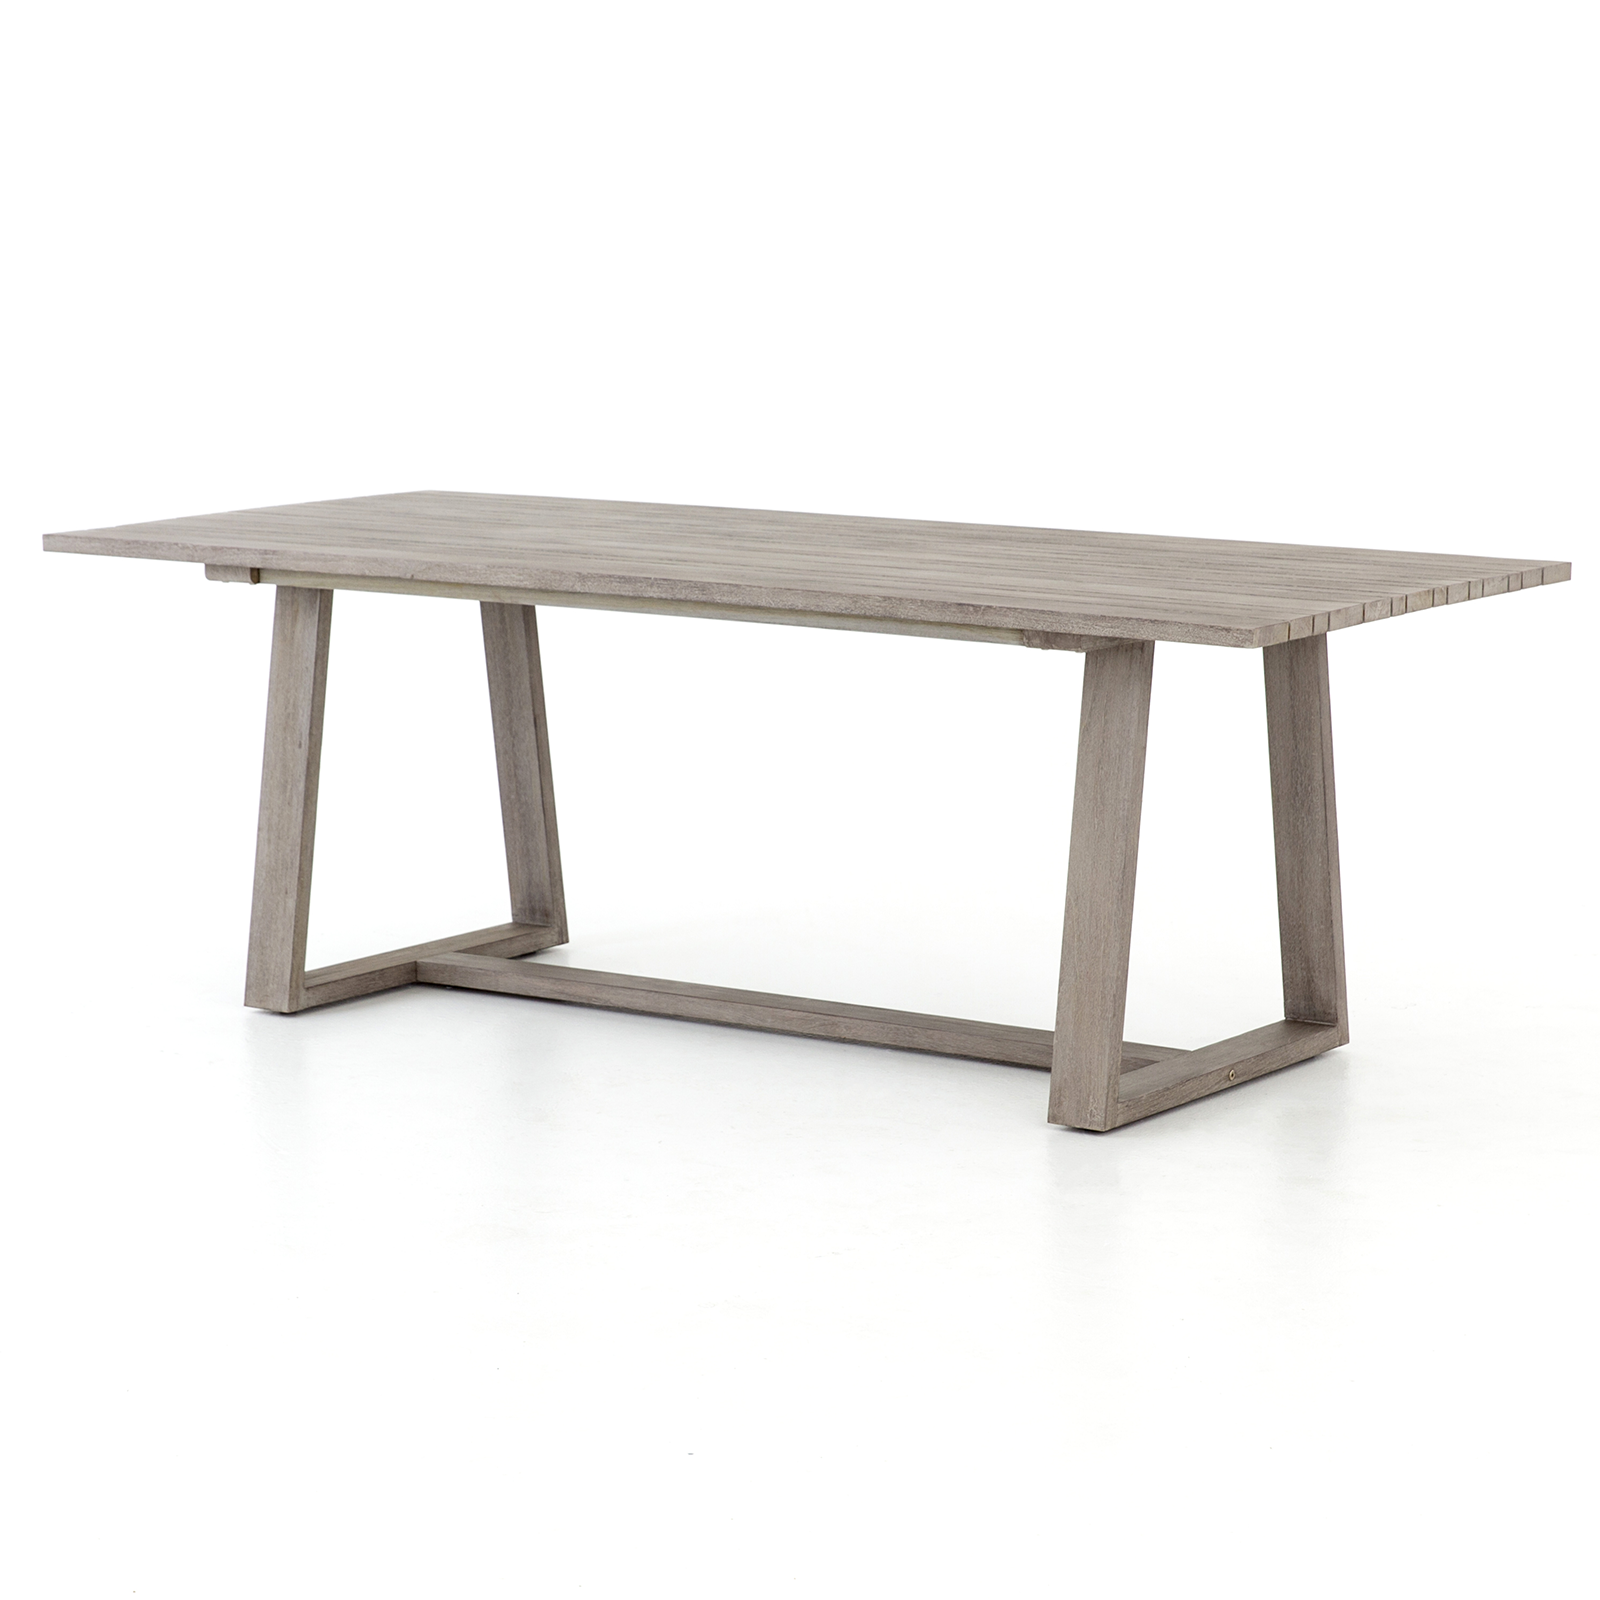 Athena 86" Outdoor Dining Table